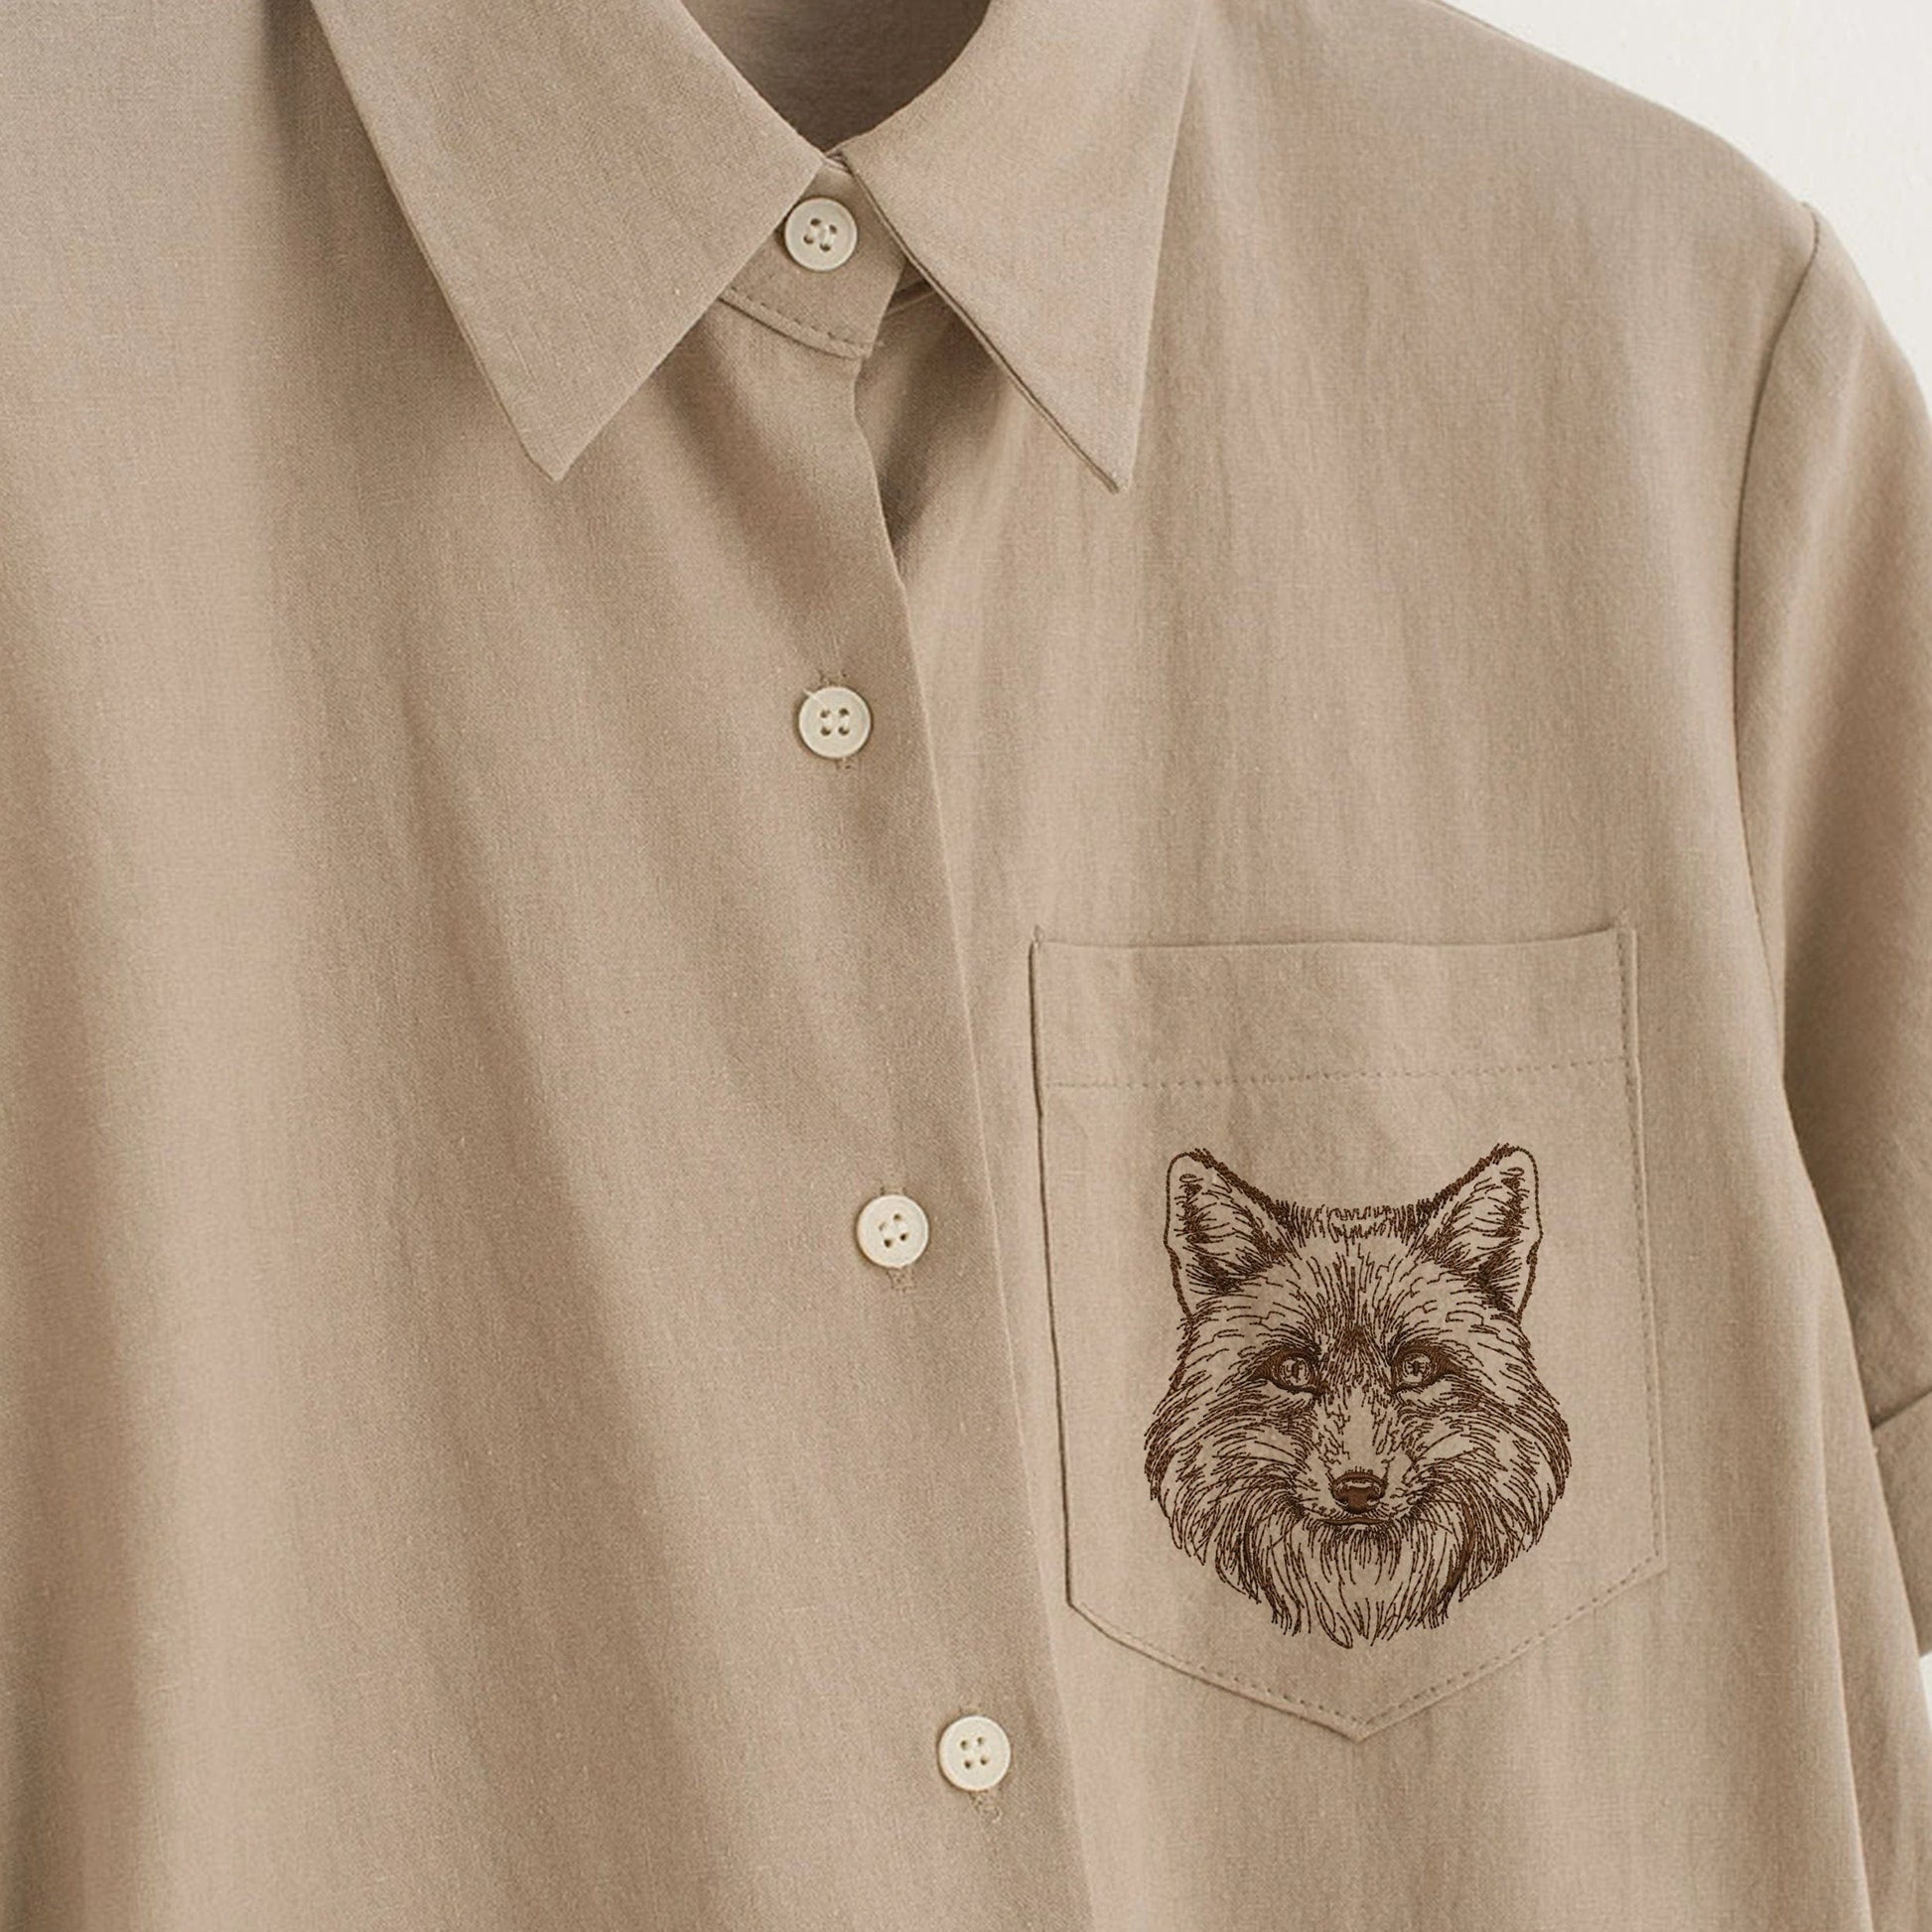 Forest Fox Face Machine Embroidery Design on blouse pocket